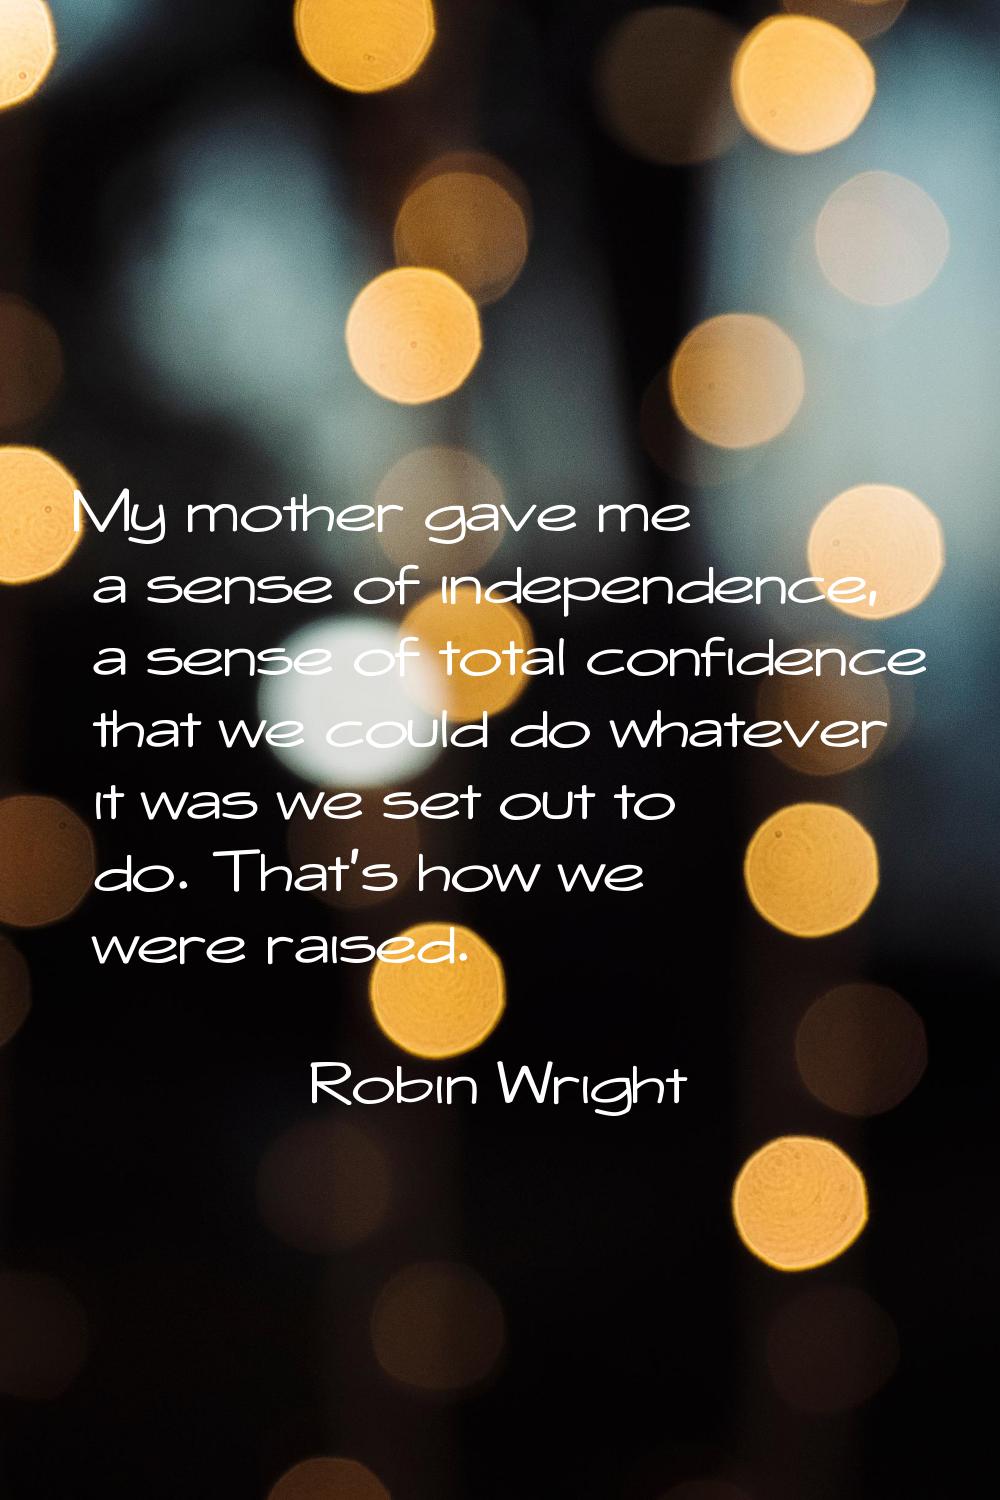 My mother gave me a sense of independence, a sense of total confidence that we could do whatever it